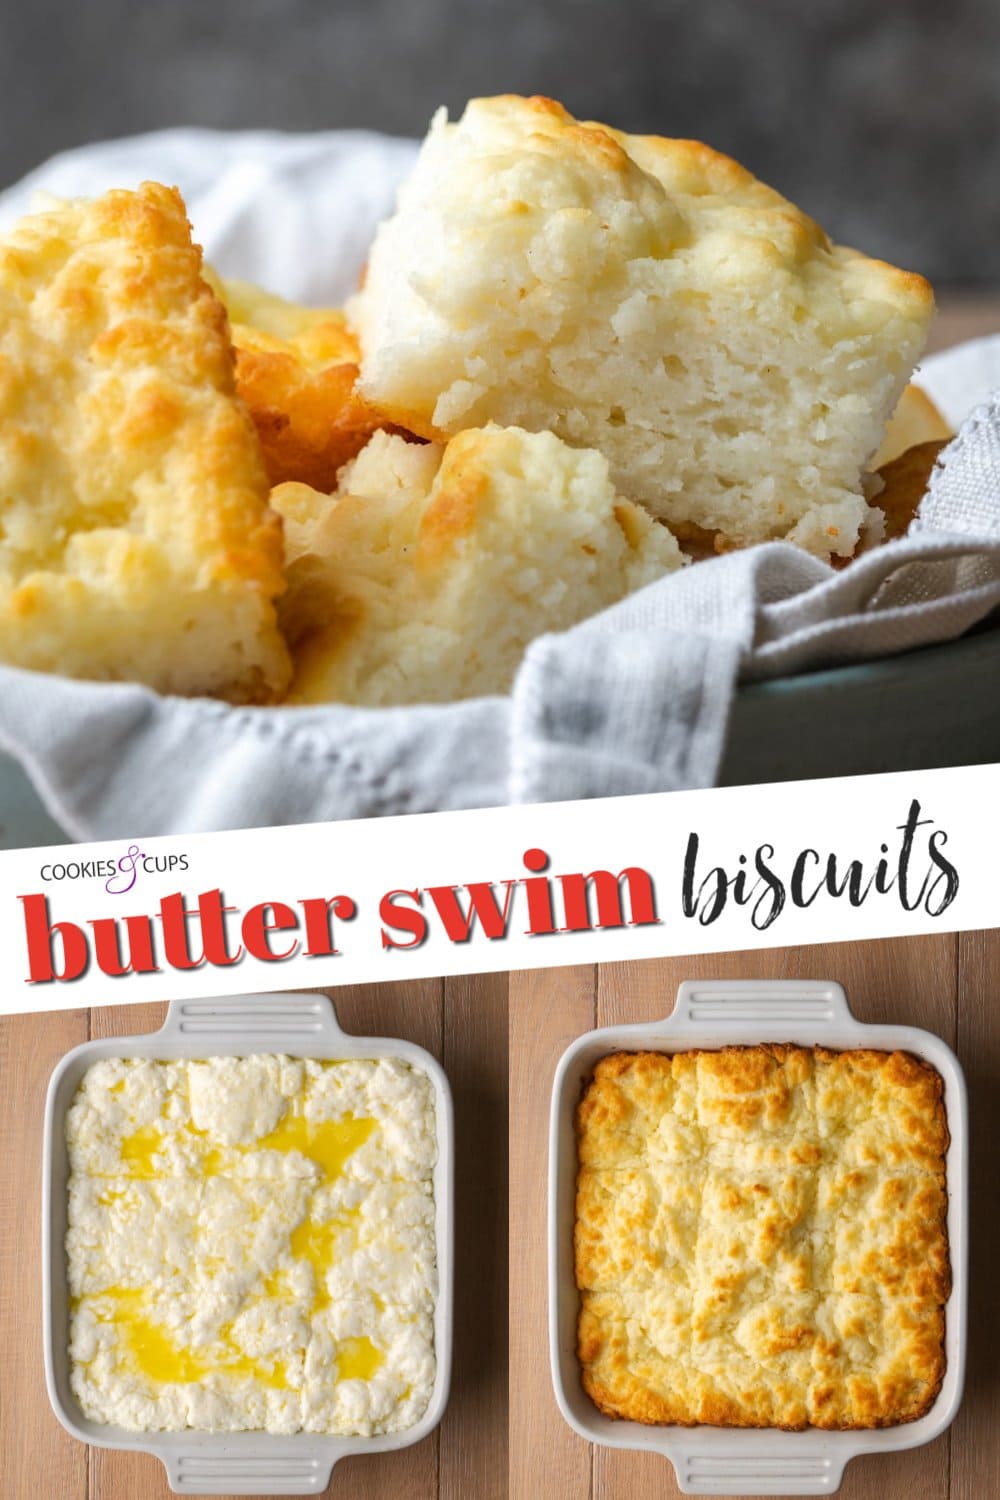 butter swim biscuits pinterest image